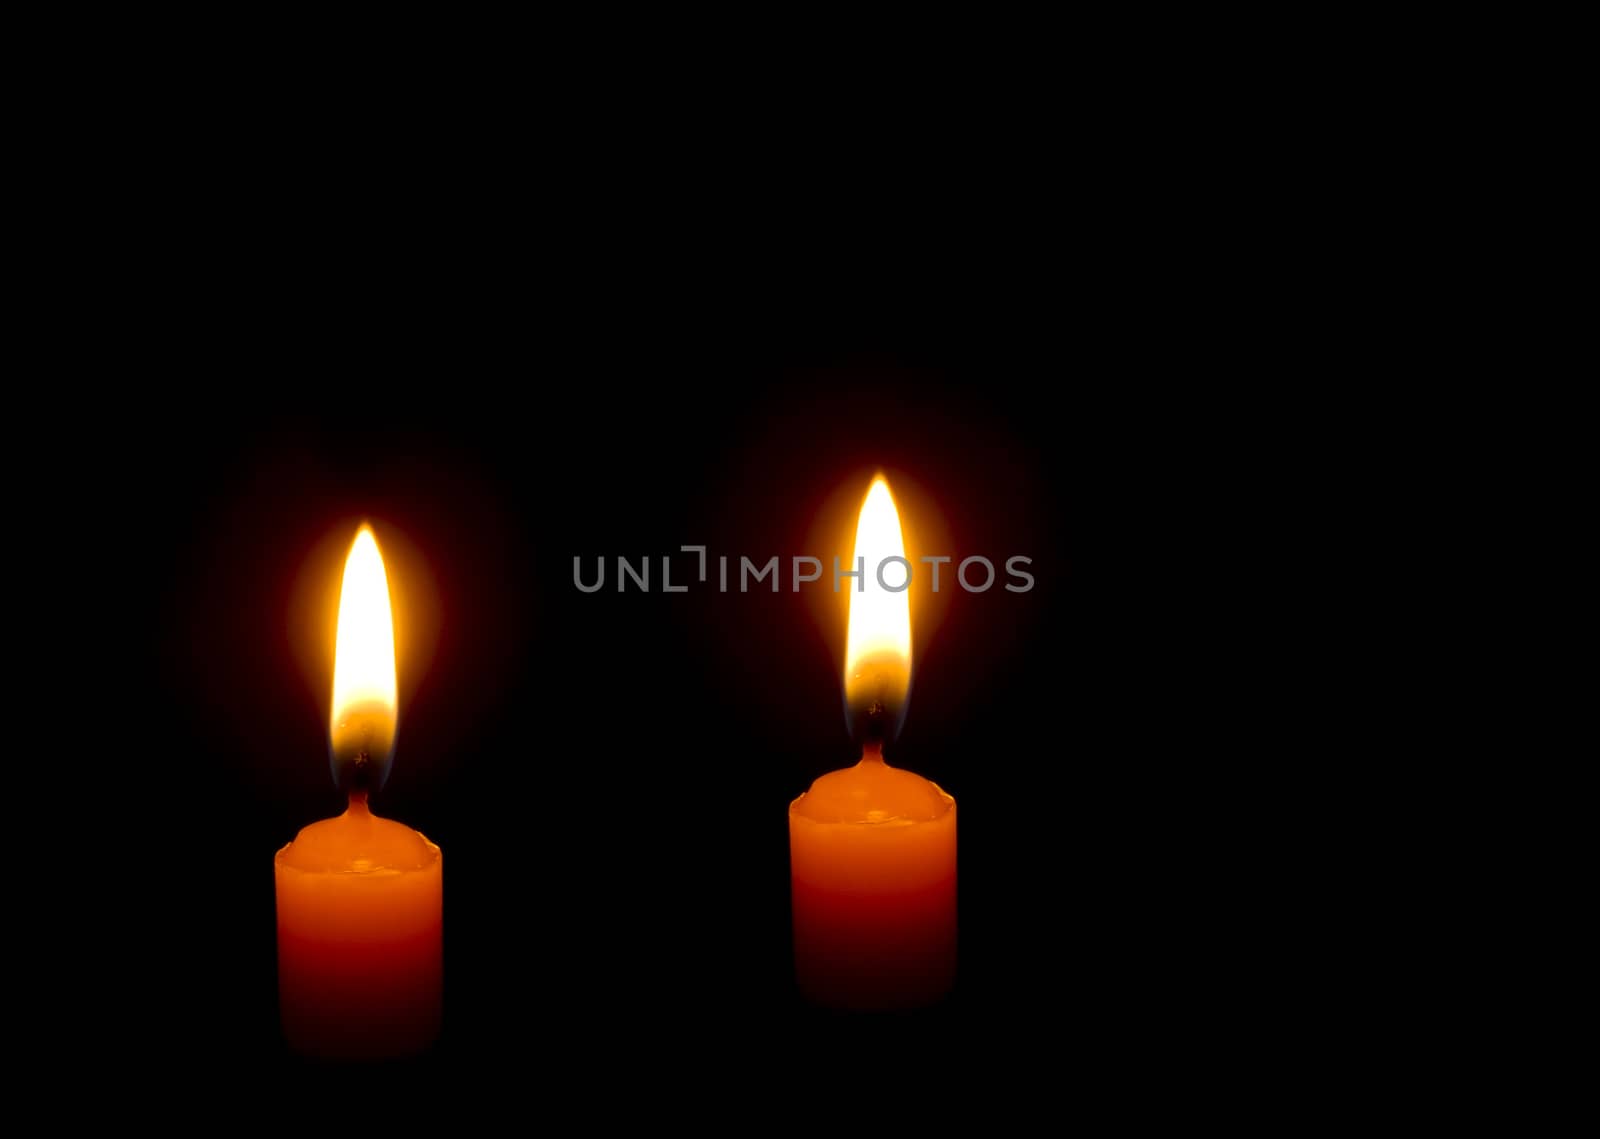 Candles in the dark.